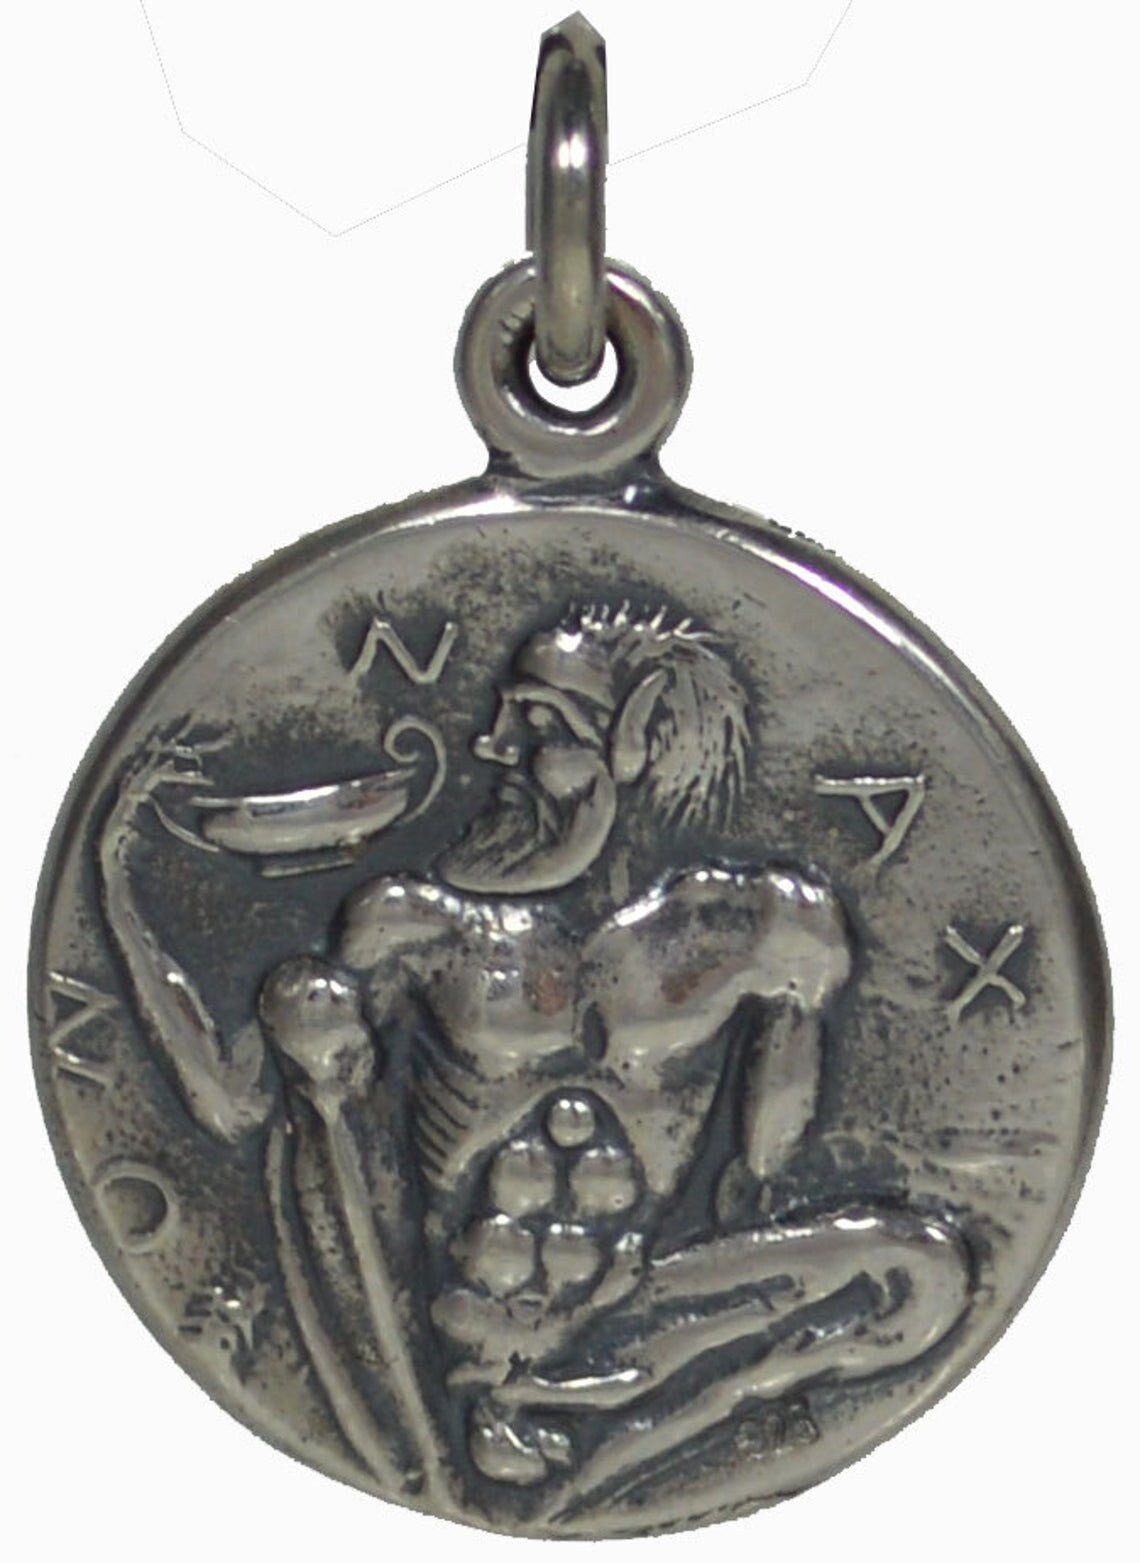 Dionysus Bacchus, God of Wine - Silenus, Companion of the God - Naxos Sicily Tetradrachm - 461-430 BC - Coin Pendant - 925 Sterling Silver